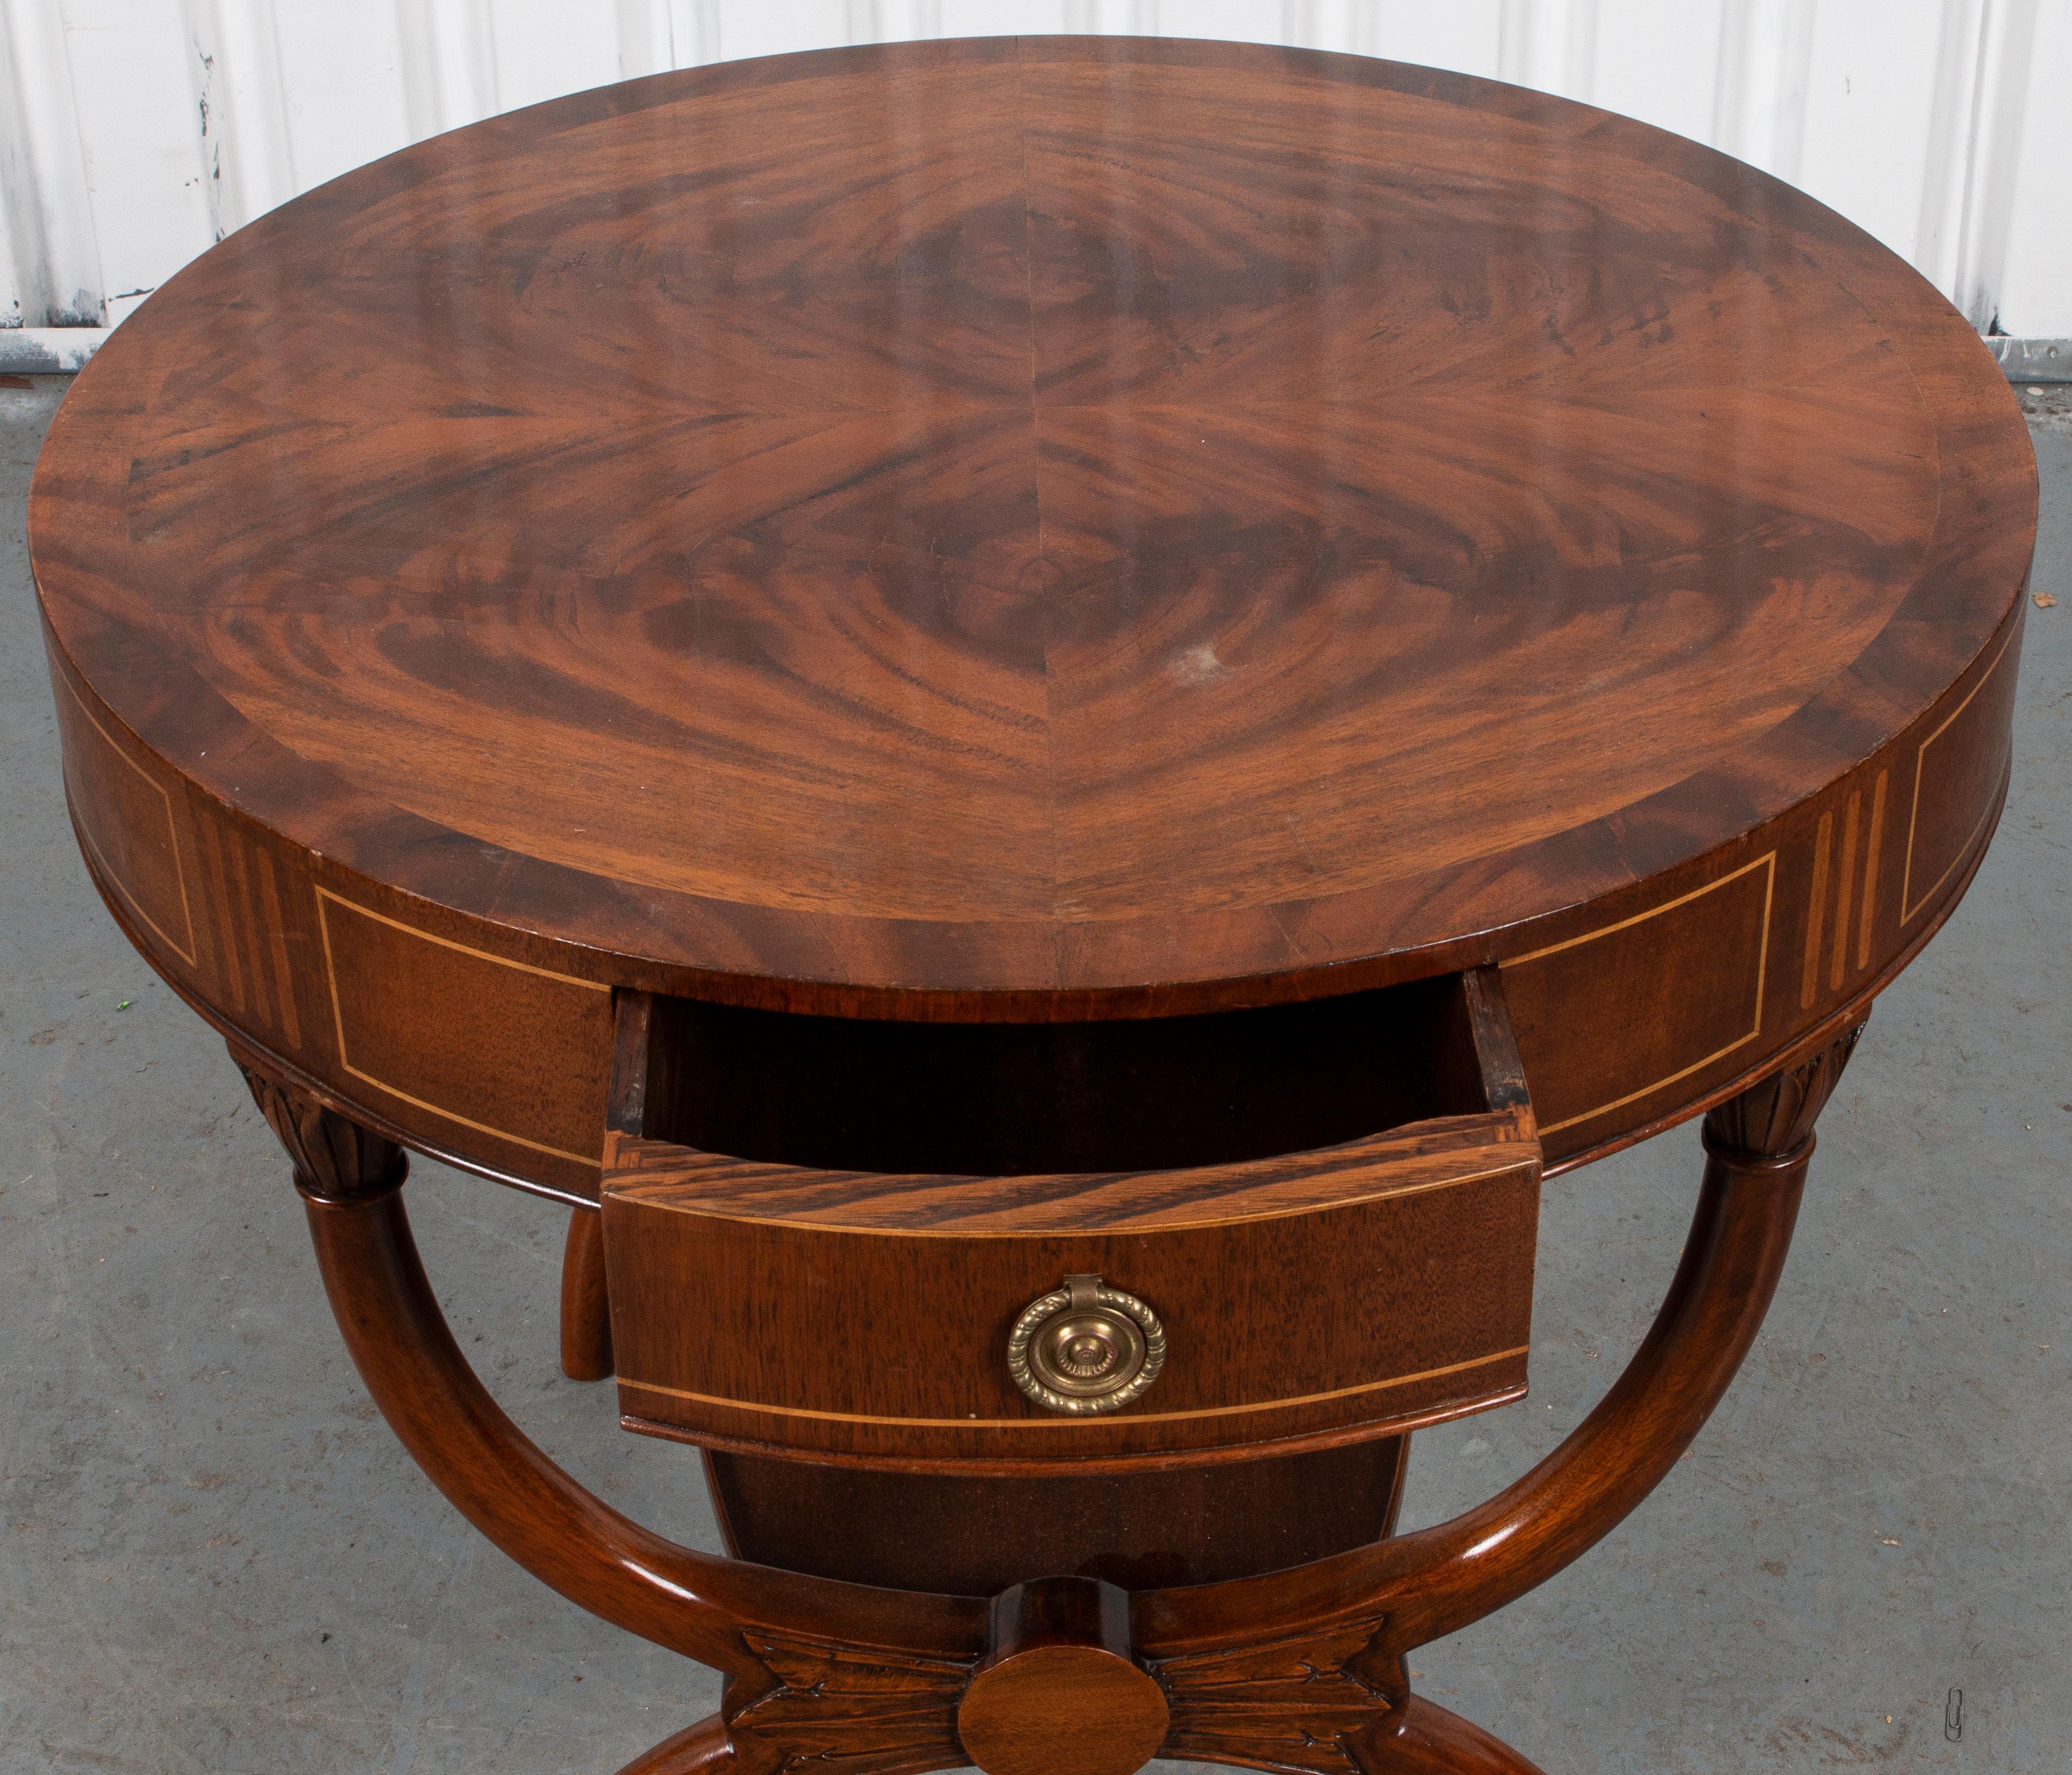 20th Century Regency Manner Inlaid Occasional Table